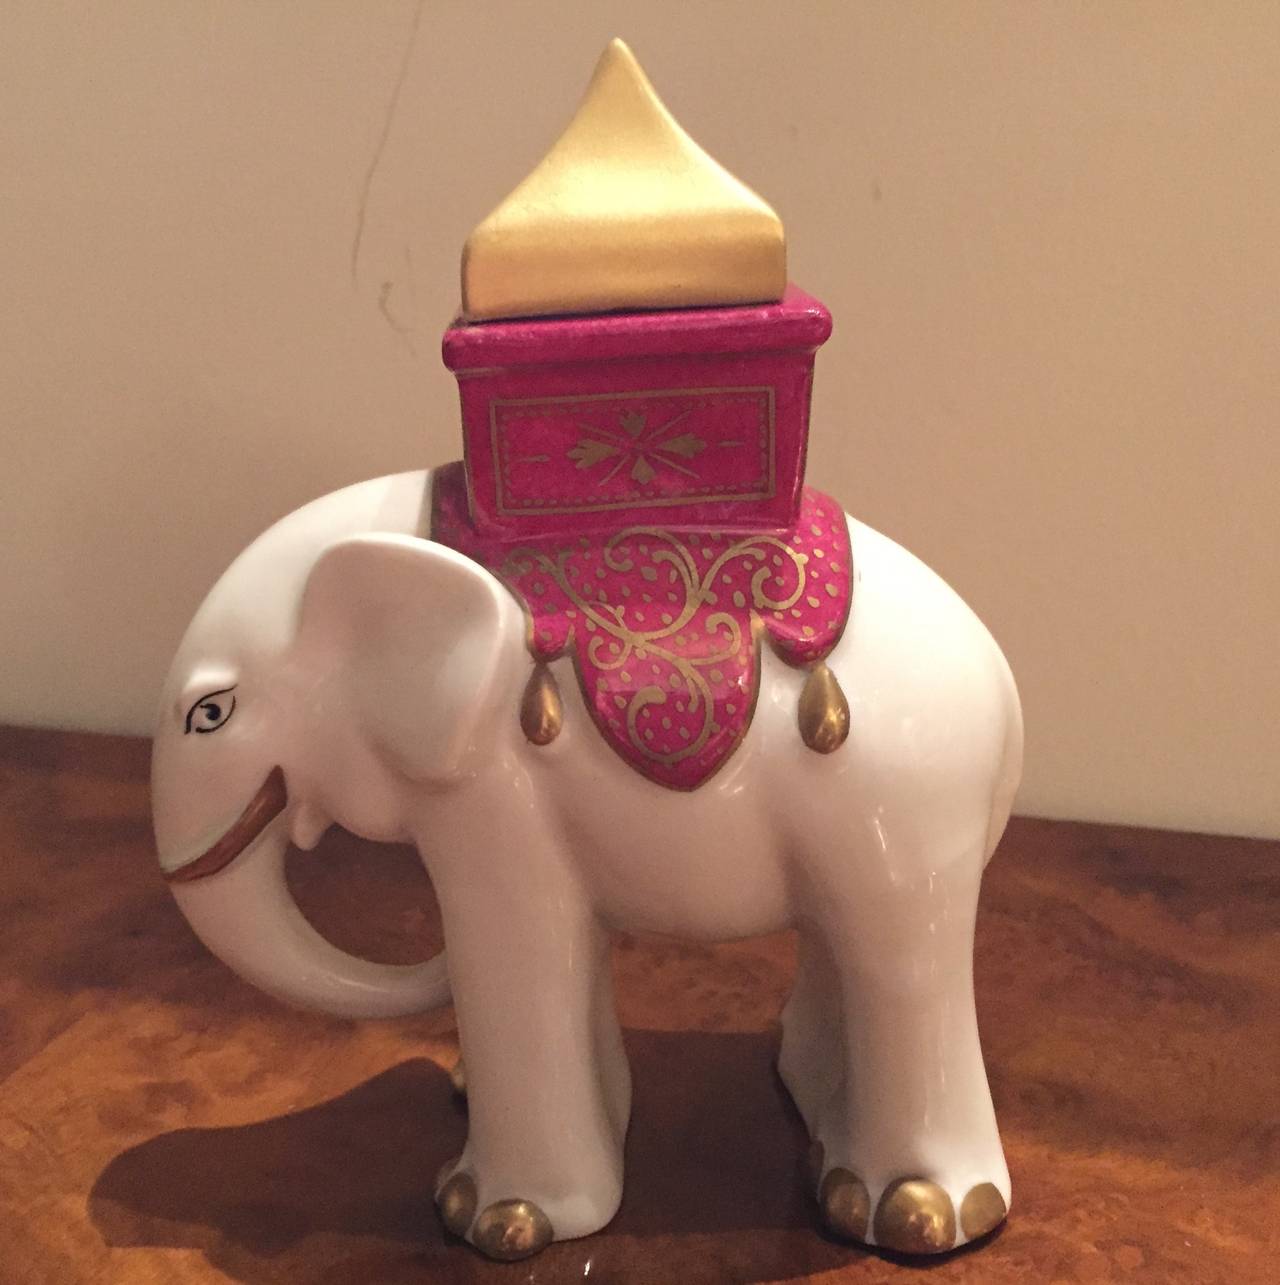 Robj Ceramic Elephant sculpture made in Paris and part of the collection of many figurines, jars that were stylized during this period.

Jean Born began his work in 1908 under the name he created, ROBJ. An industrial designer through the ‘teens,